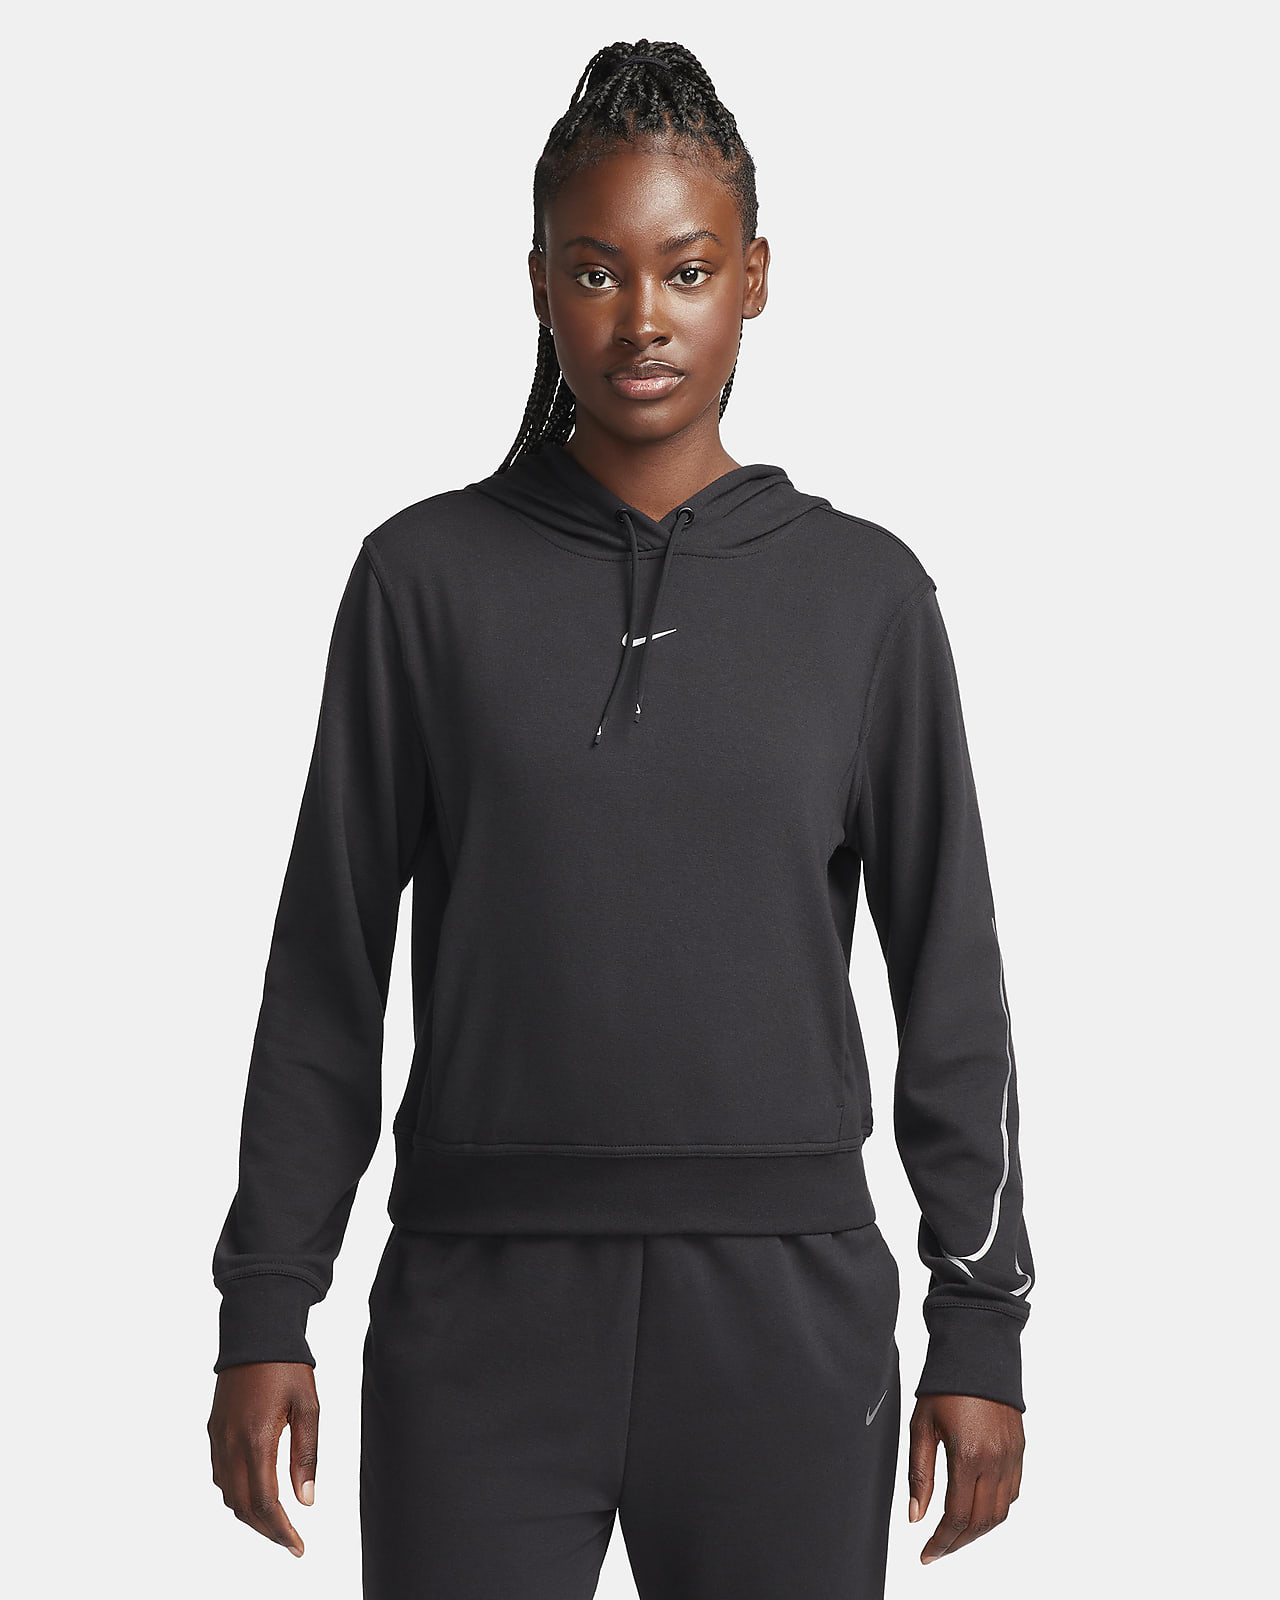 Nike Dri-FIT One Hoodie. Graphic Women\'s French Terry